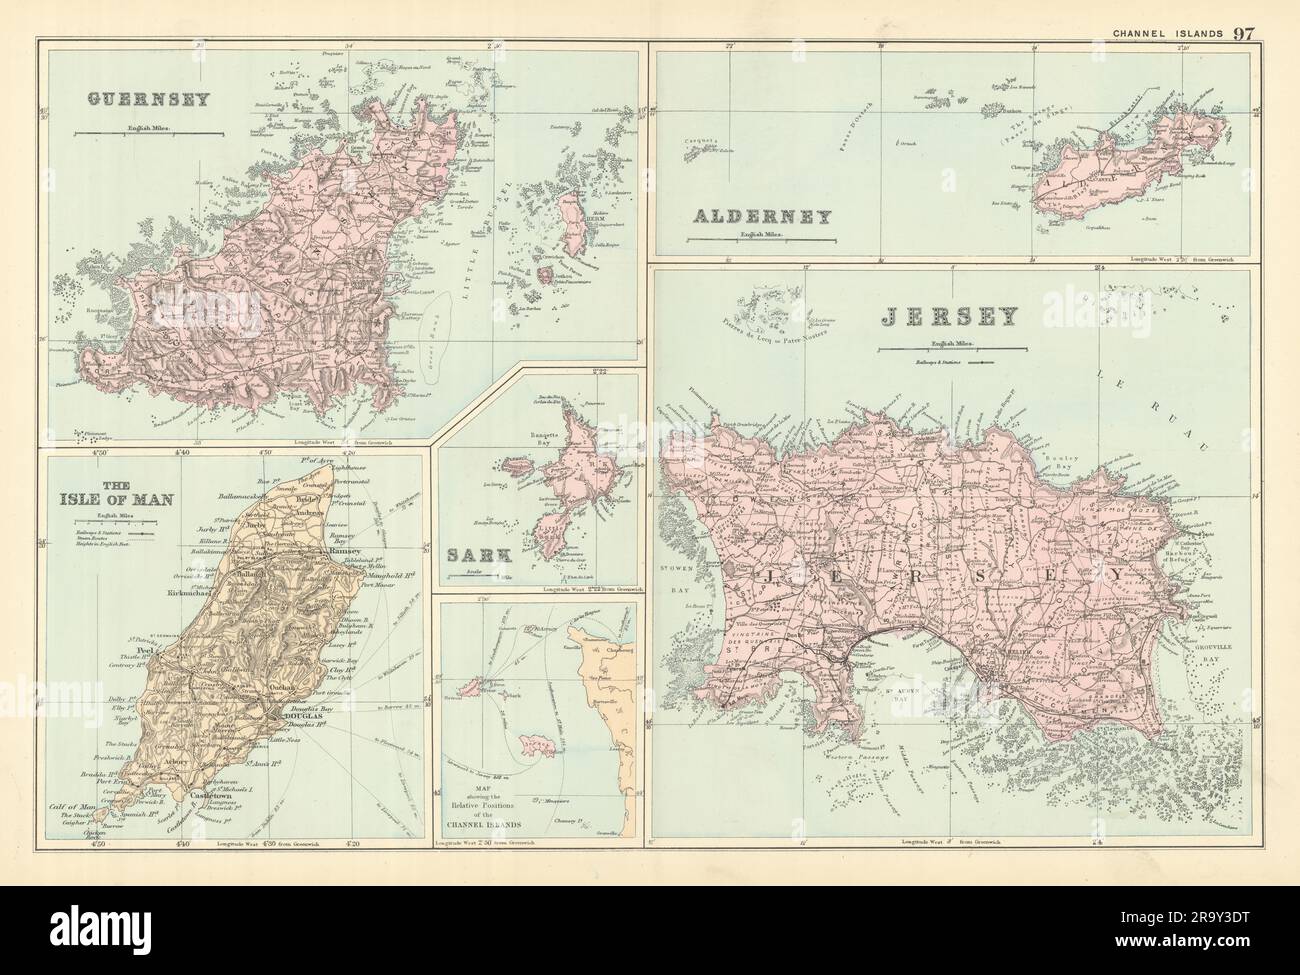 CHANNEL ISLANDS & ISLE OF MAN Alderney Guernsey Jersey Sark by GW BACON 1891 map Stock Photo